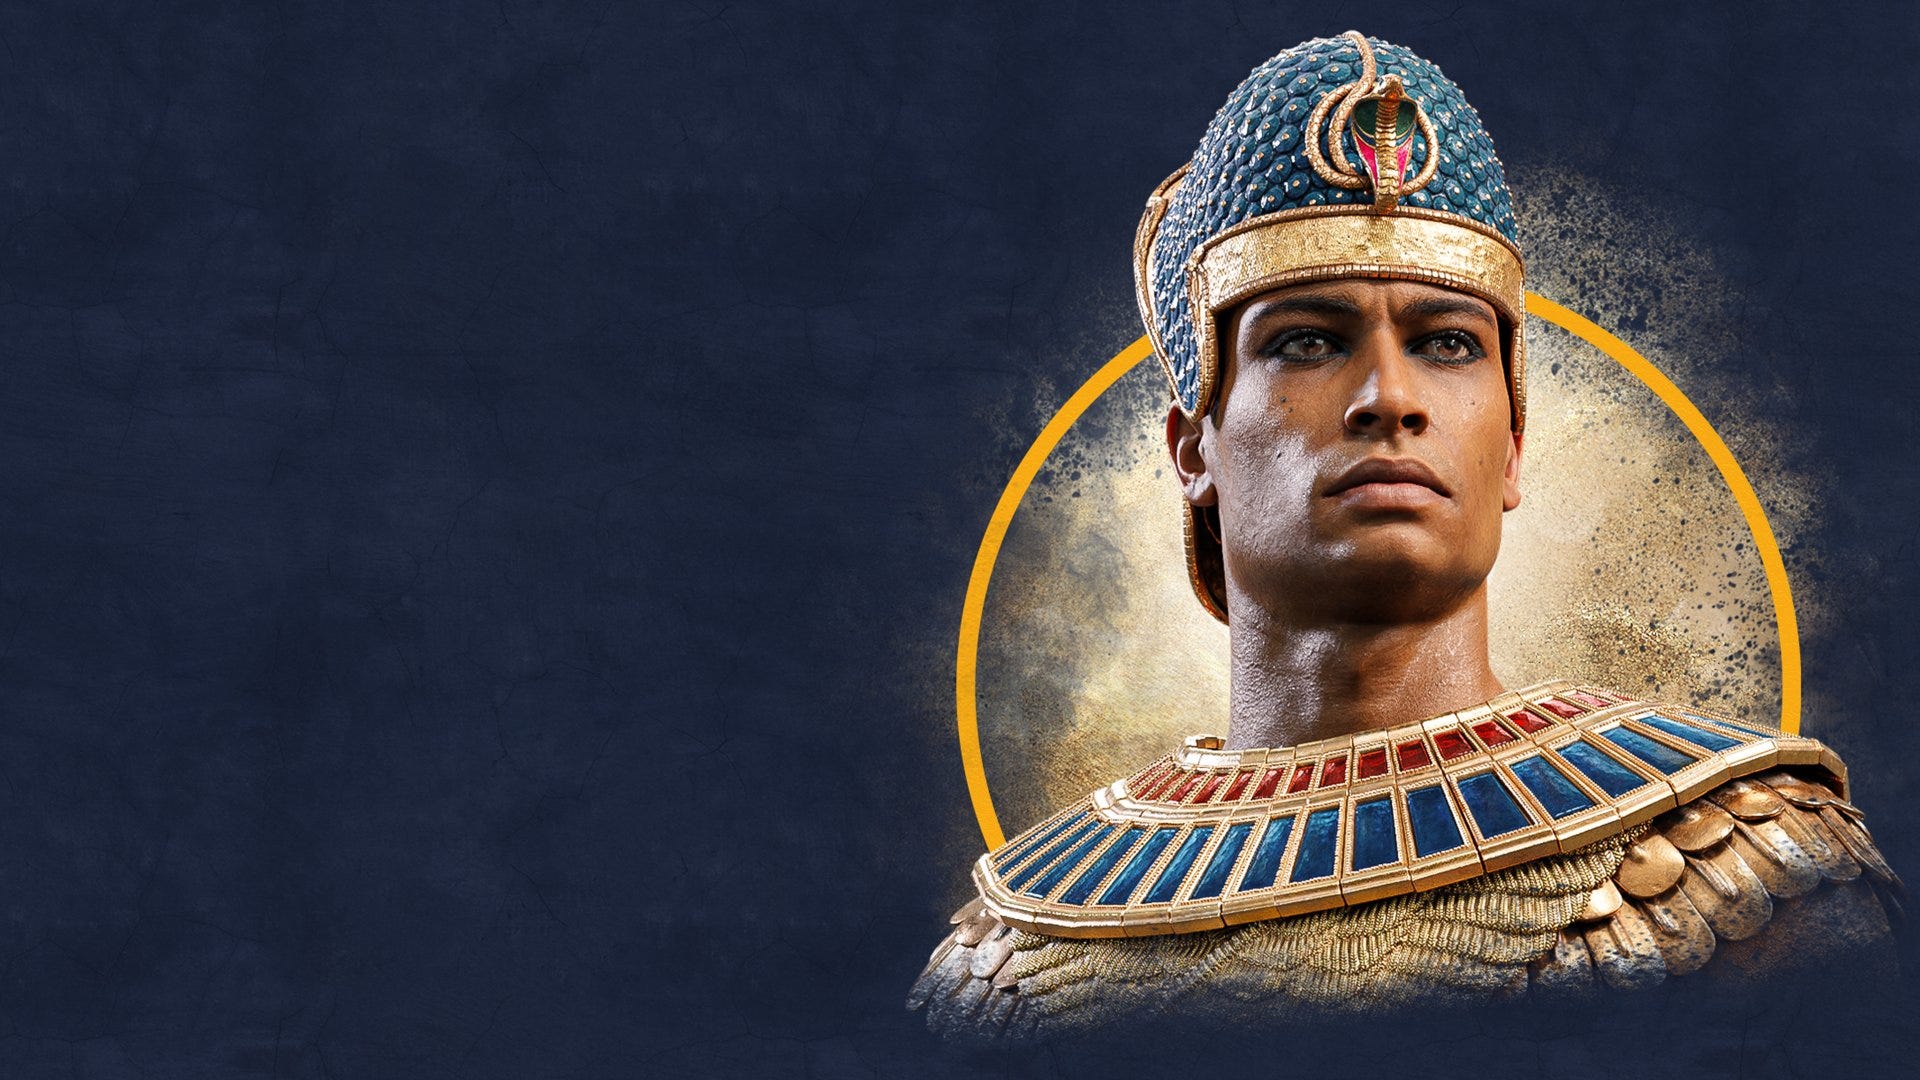 Total War: Pharaoh thrusts you into the turbulent events of the New Kingdom period